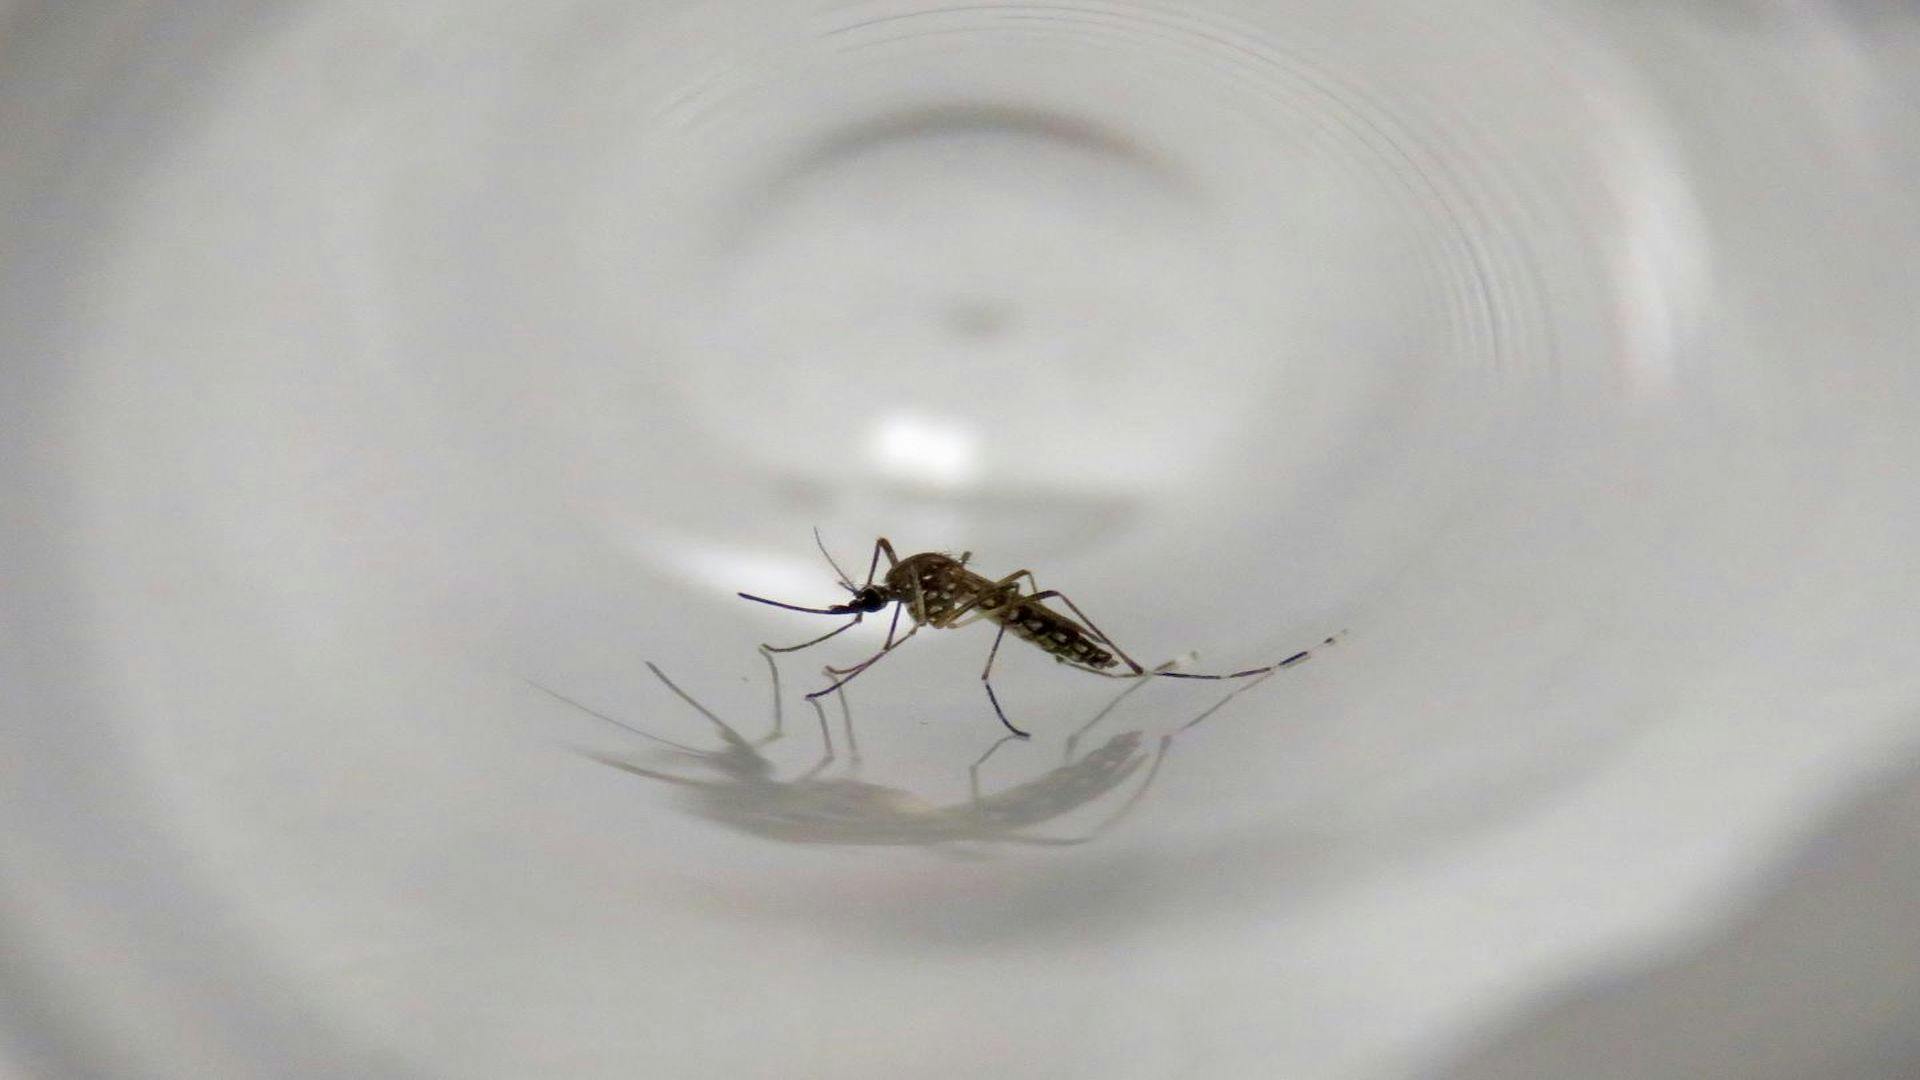 Aedes aegypti Mosquitos Introduced to California Multiple Times